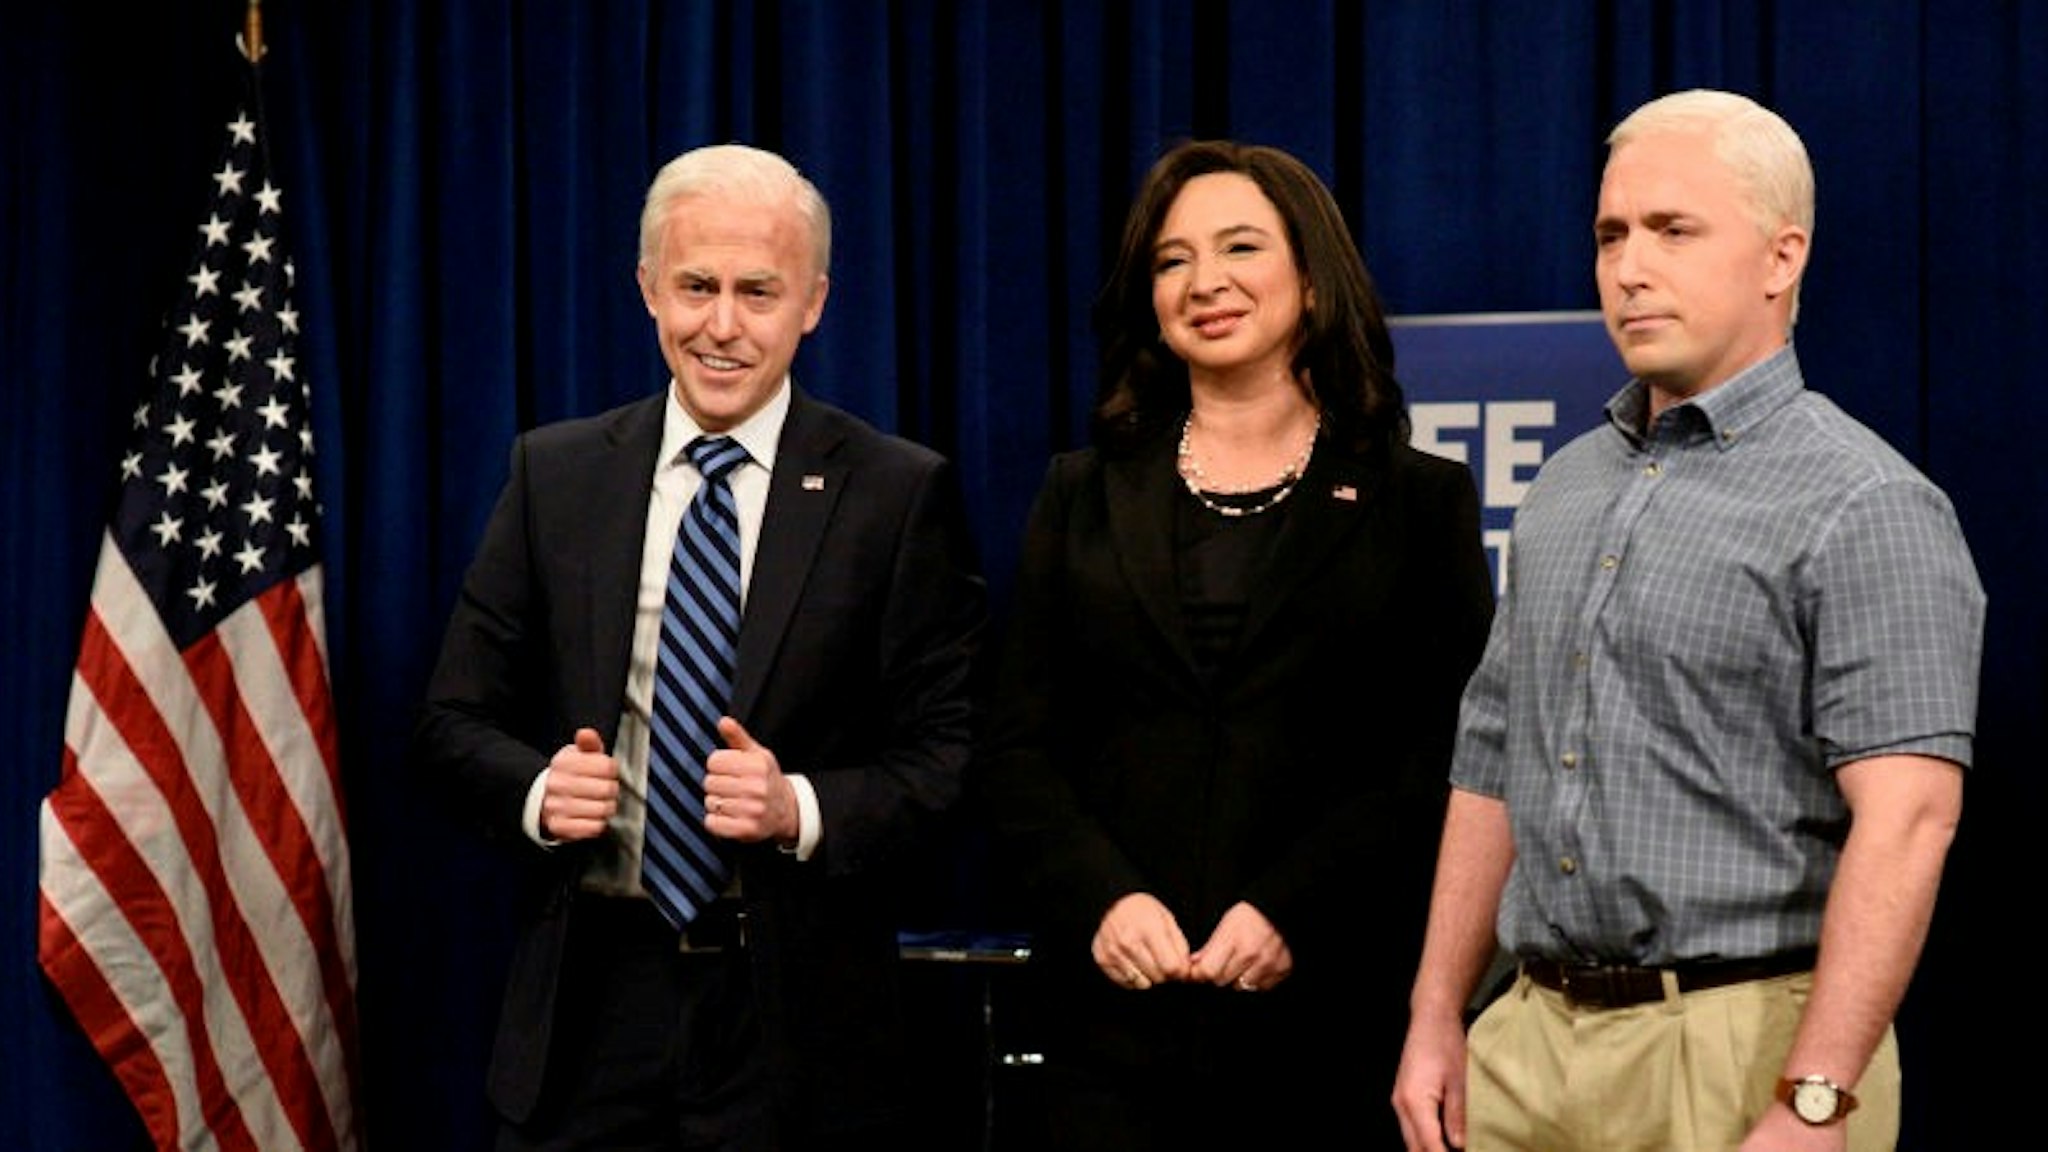 SATURDAY NIGHT LIVE -- "Kristen Wiig" Episode 1794 -- Pictured: (l-r) Alex Moffat as Joe Biden, Maya Rudolph as Kamala Harris, and Beck Bennett as Mike Pence during the "Pence Gets The Vaccine" Cold Open on Saturday, December 19, 2020 -- (Photo By: